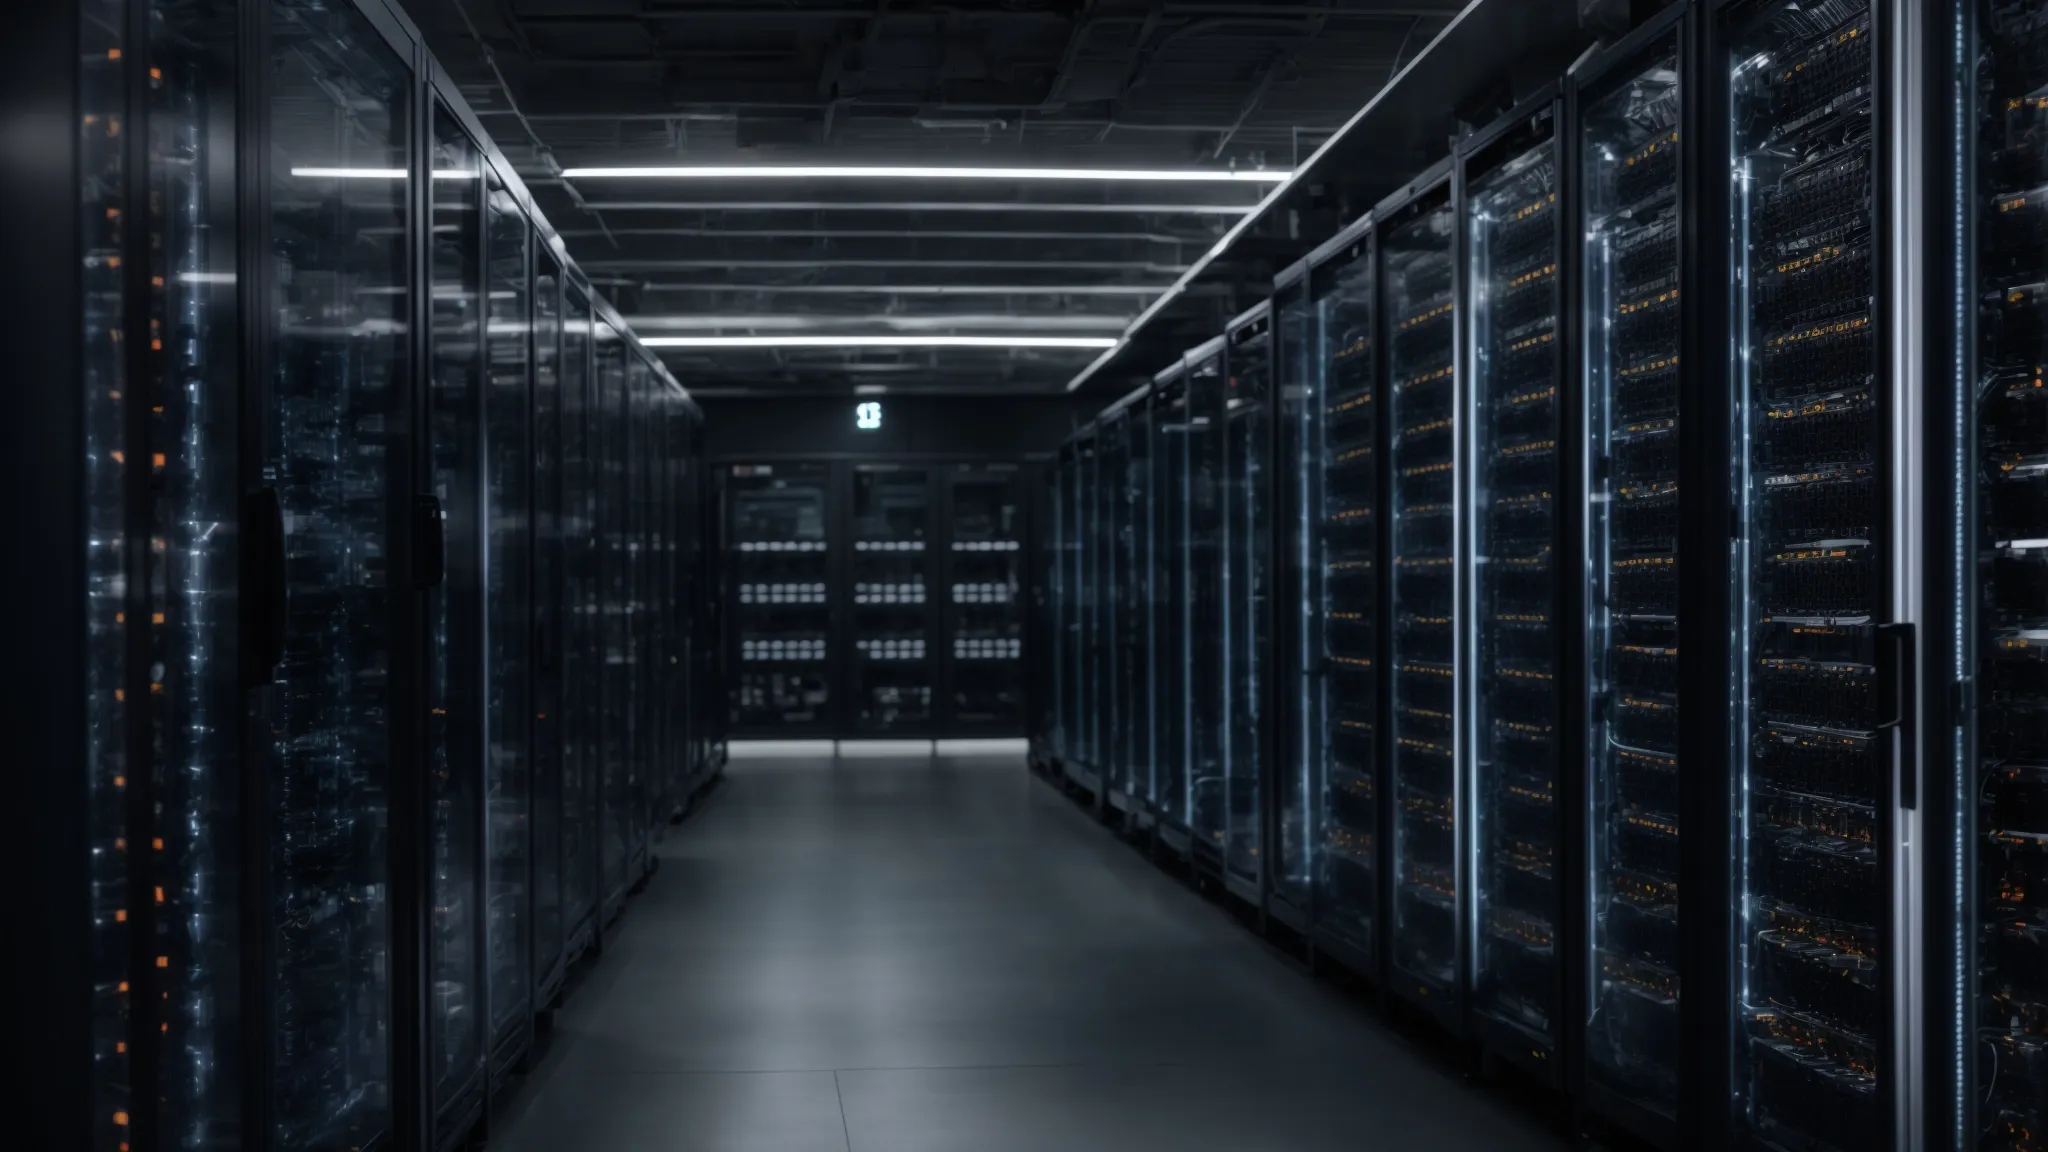 an expansive server room with rows of high-tech equipment, symbolizing the backbone of enterprise e-commerce infrastructure.